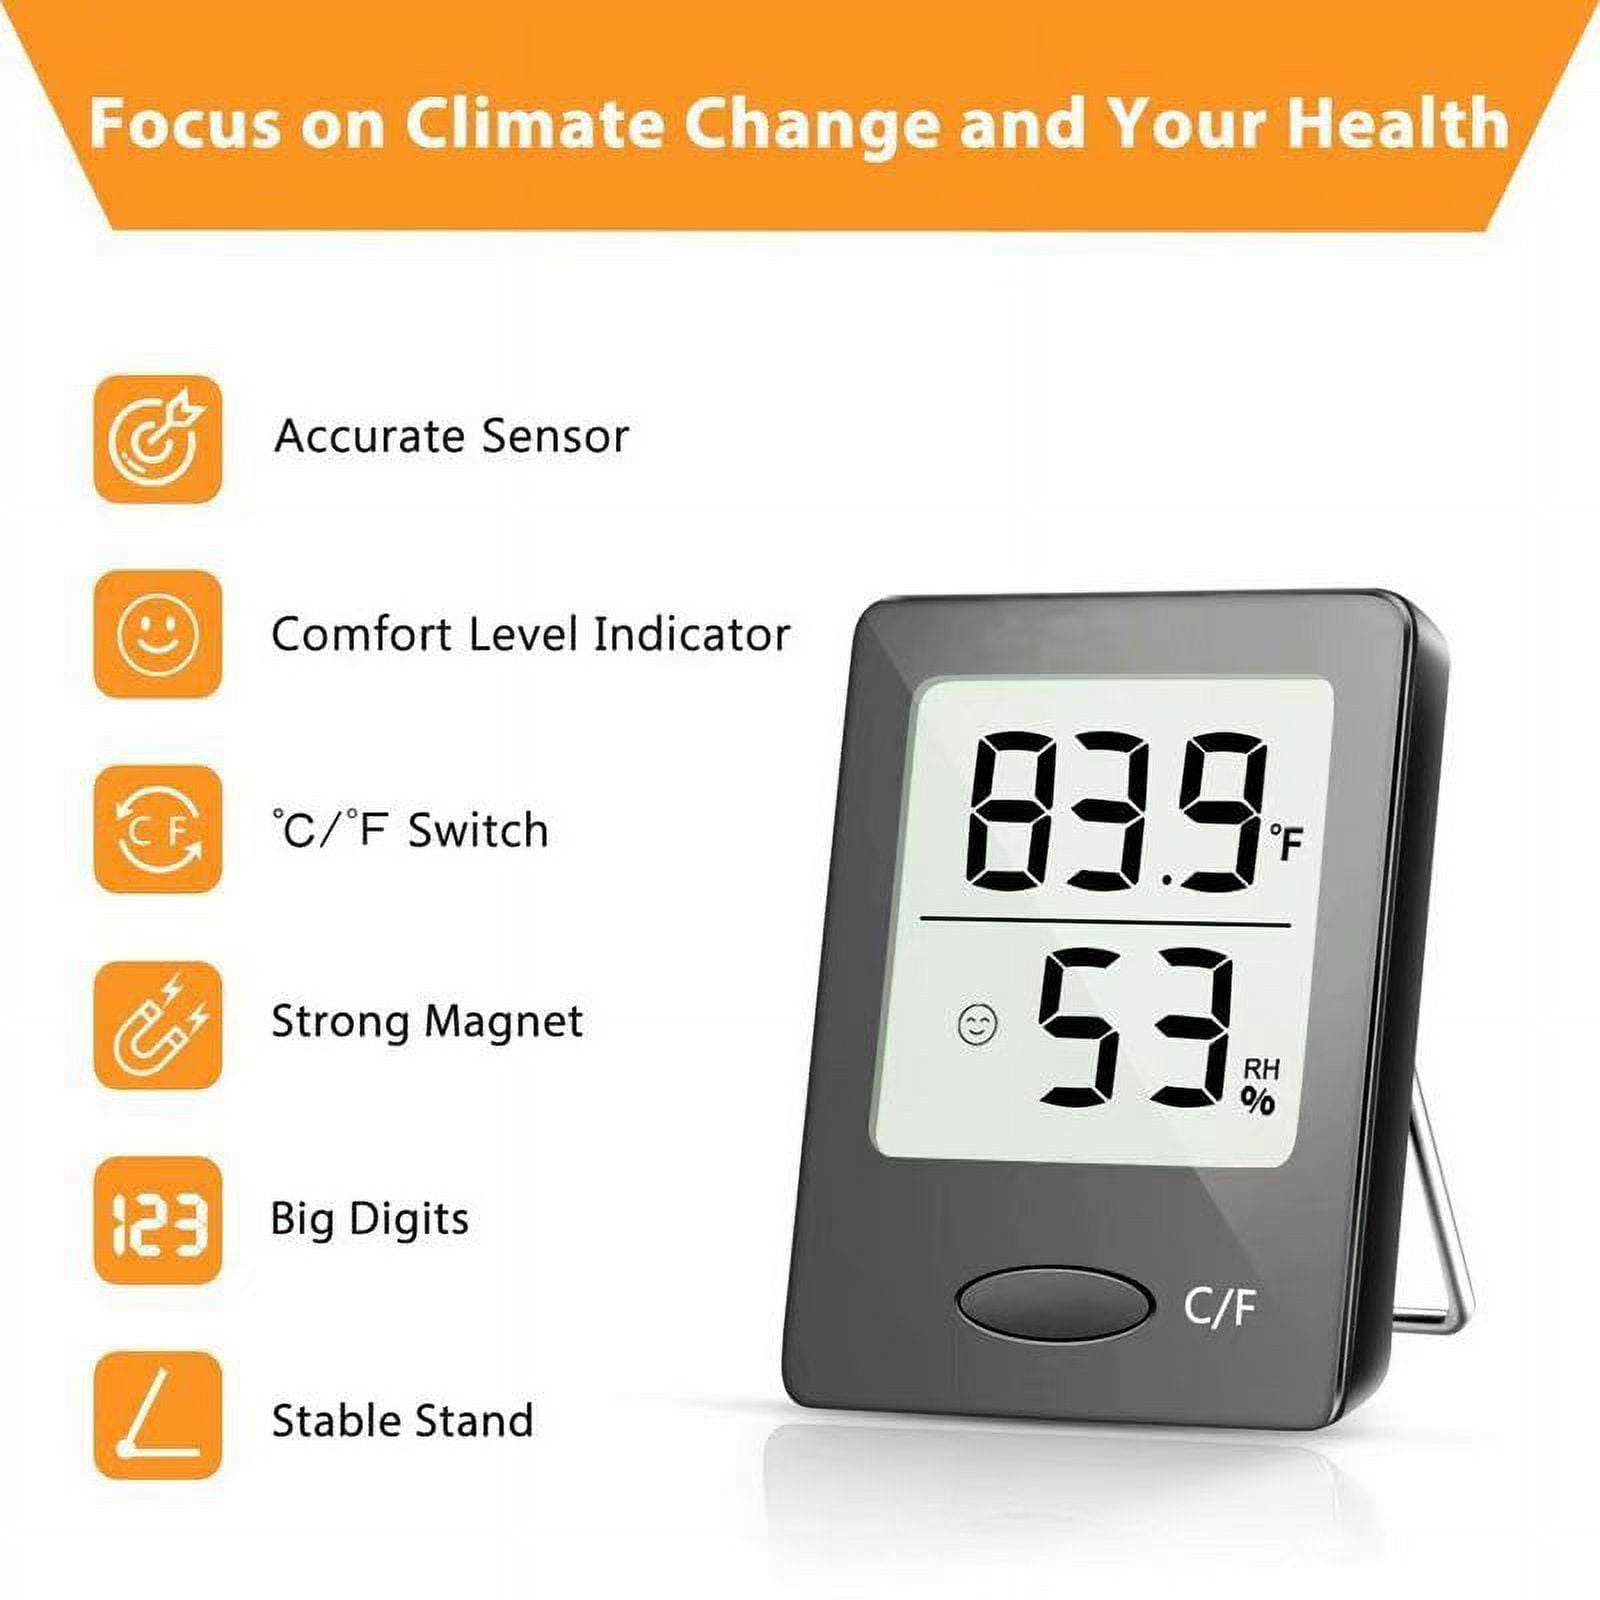 Executive Thermometer, Humidity Reader, Barometer, and Clock